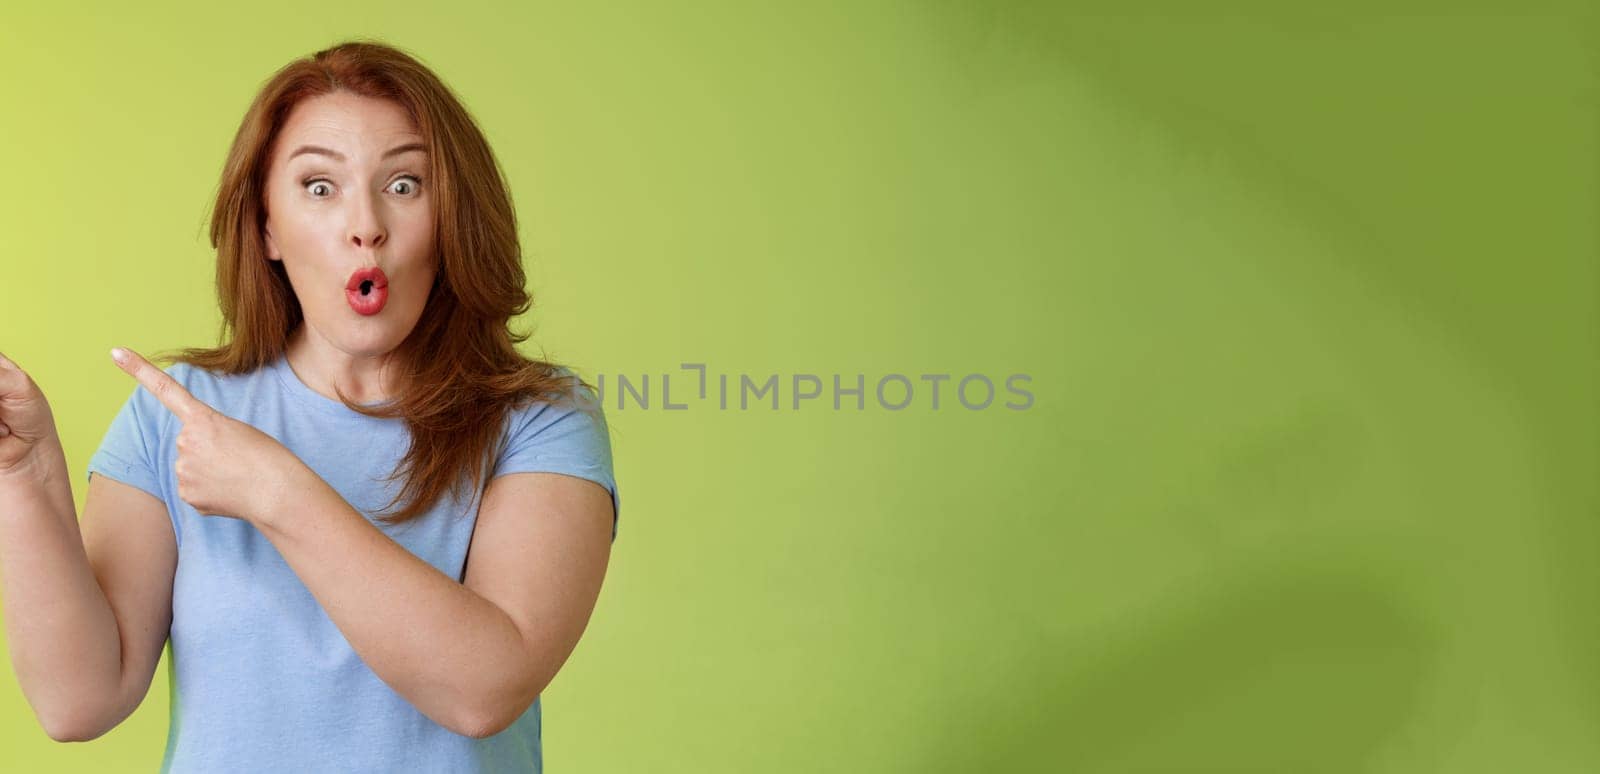 Surprised fascinated enthusiastic redhead middle-aged woman impressed awesome promo fold lips curiousity admiration stare camera thrilled pointing upper left corner great sale advertisement.